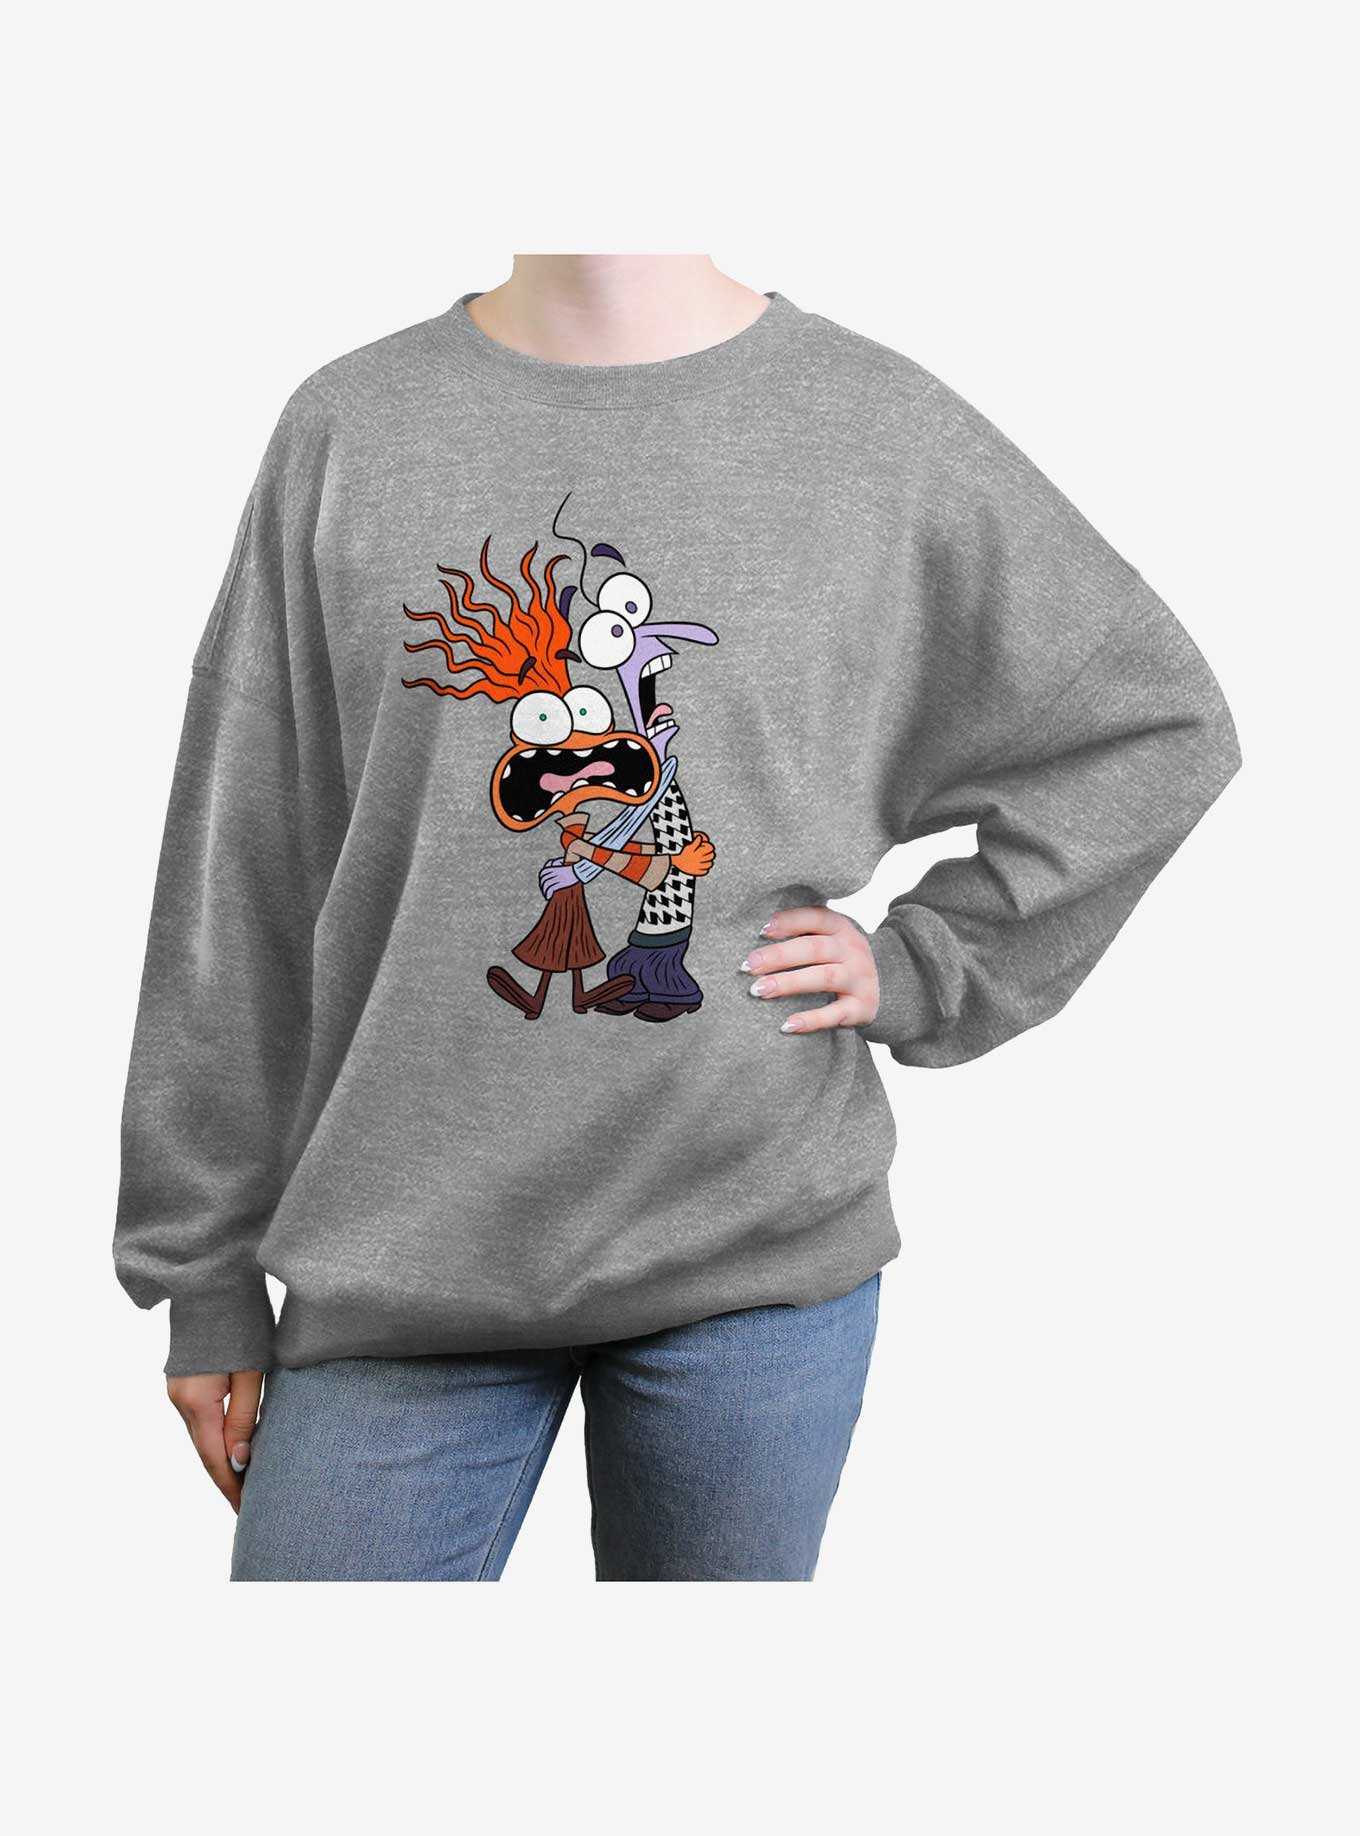 Disney Pixar Inside Out 2 Anxiety And Fear Womens Oversized Sweatshirt, , hi-res